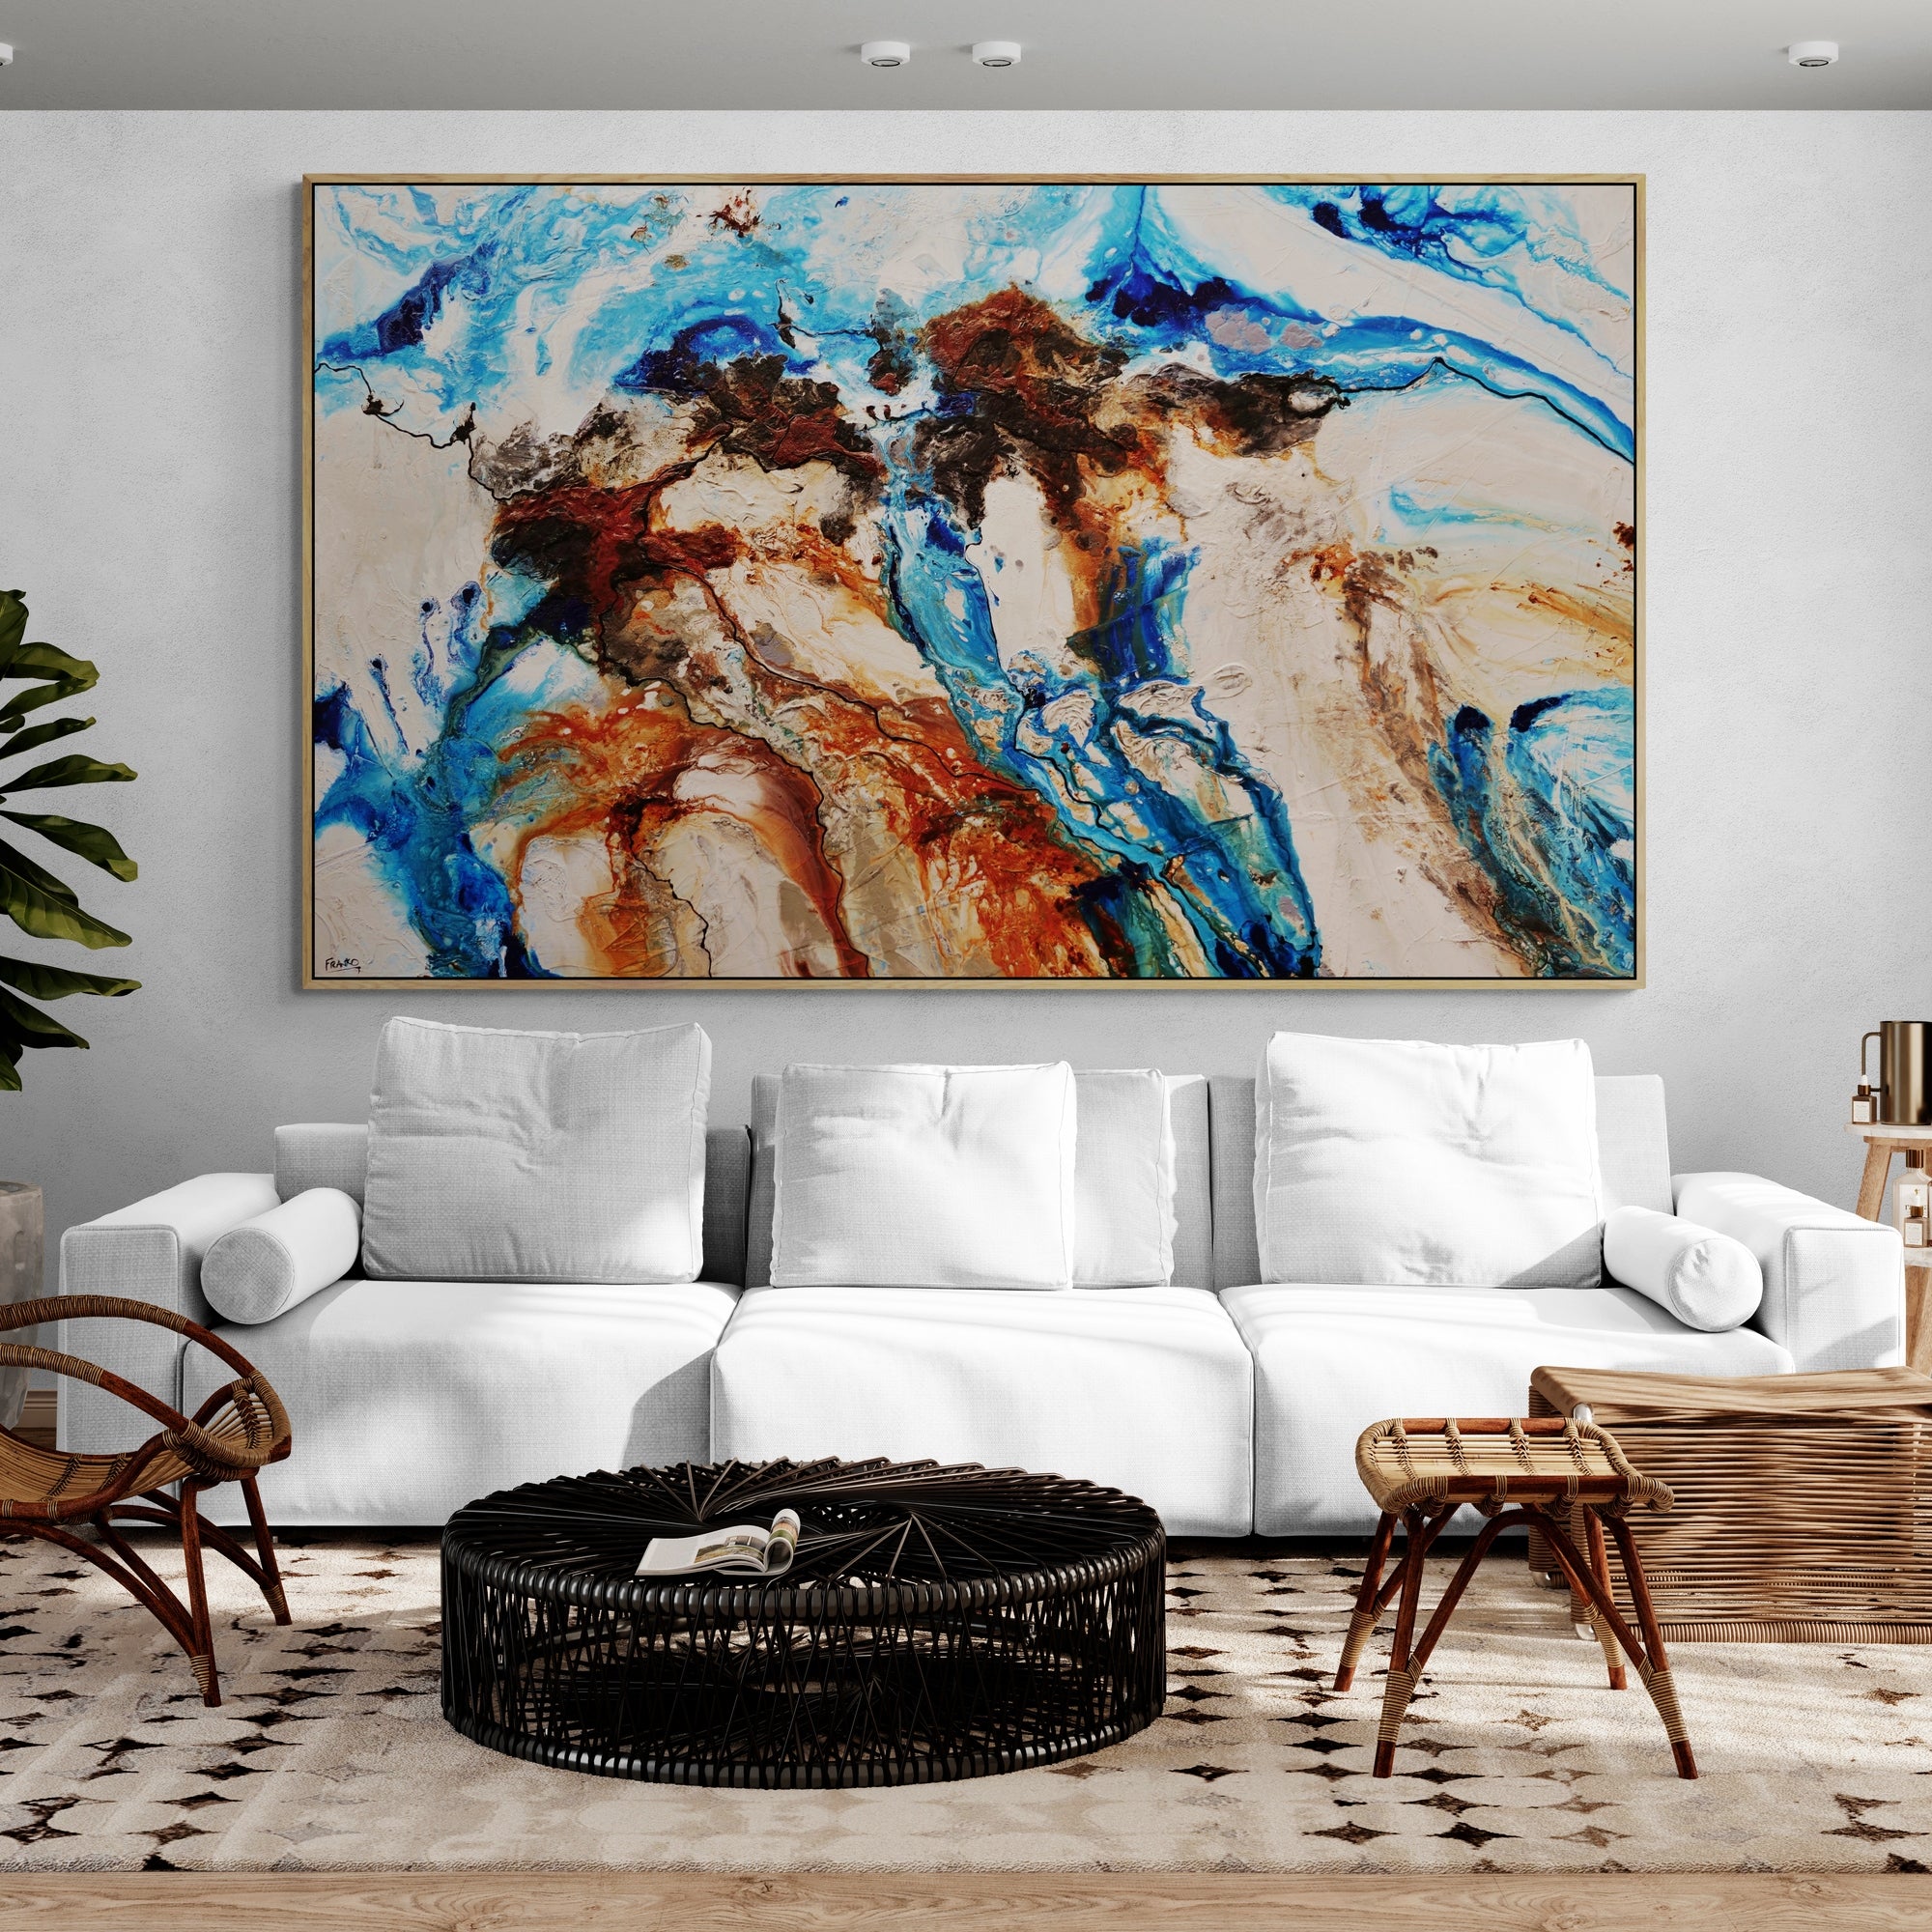 Big Country 280cm x 170cm Malt Blue Textured Abstract Painting